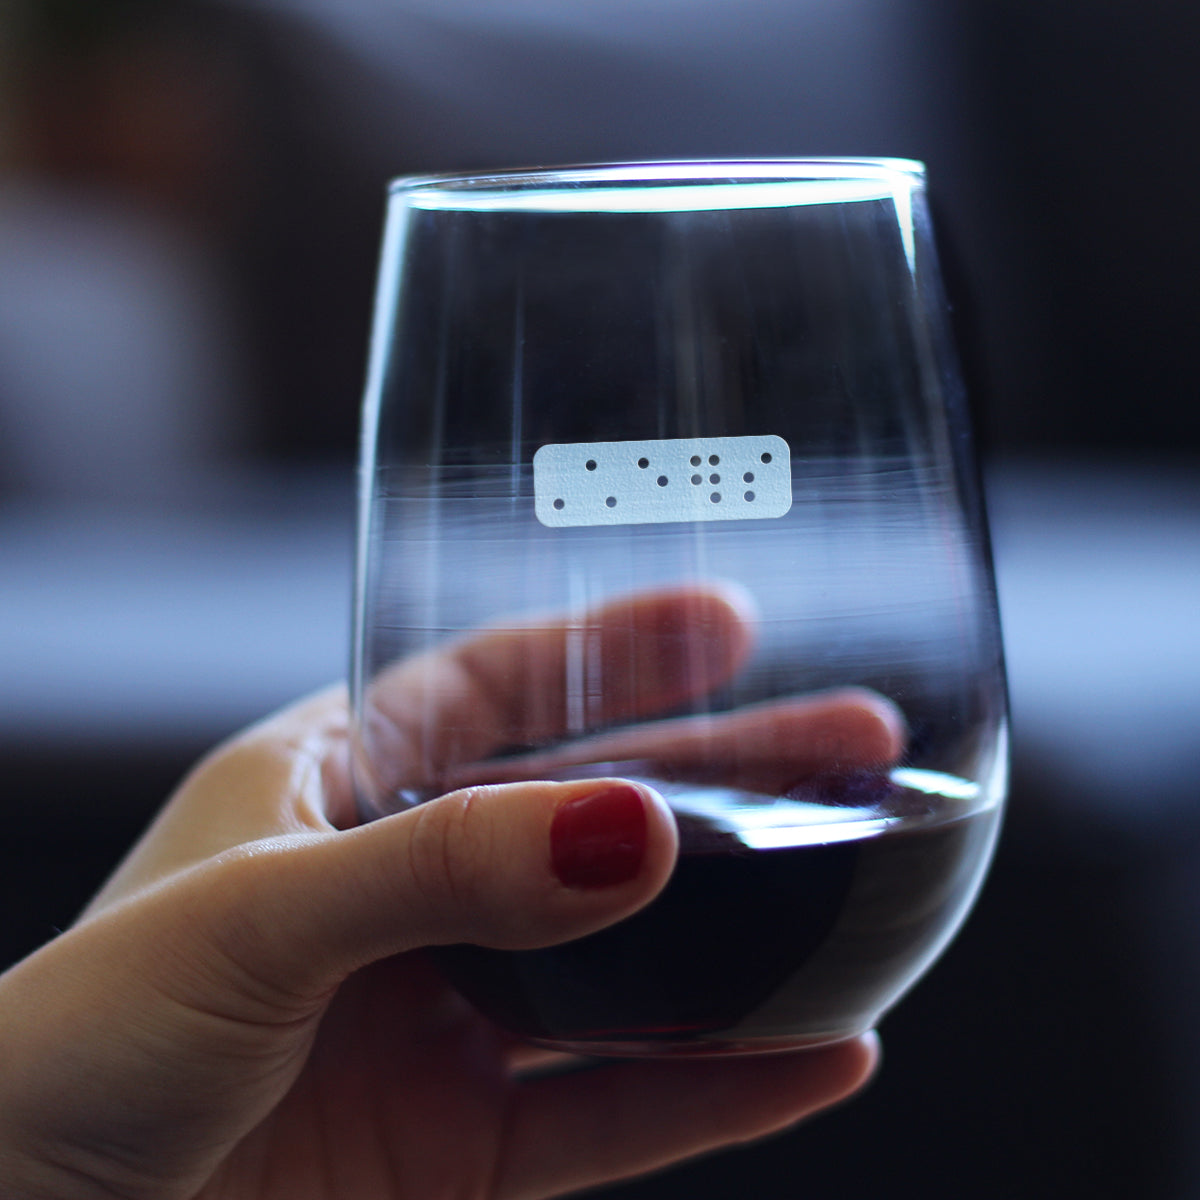 Braille Cheers Stemless Wine Glass - Fun Braille Gifts for Braille Teachers and Visually Impaired or Blind Braille Readers - Large 17 Oz Glasses